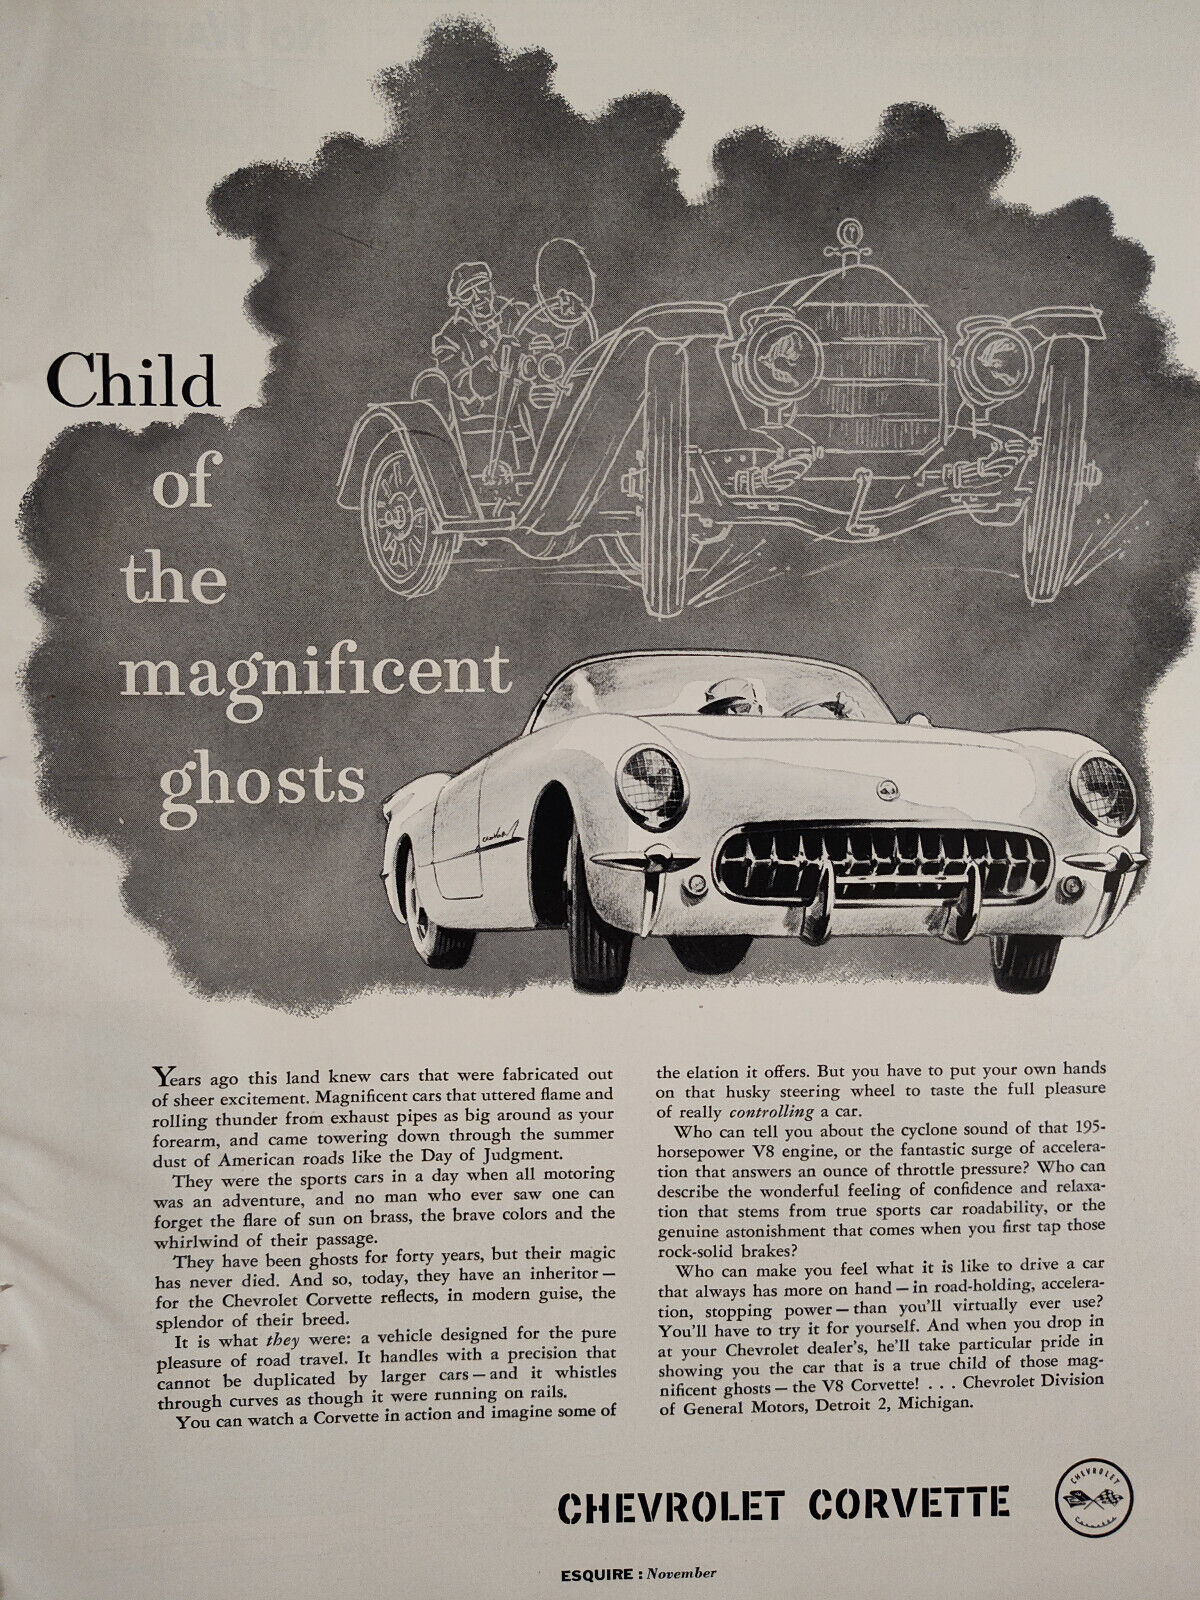 1955 Esquire Advertisement Chevrolet CORVETTE Child of the Magnificent Ghosts